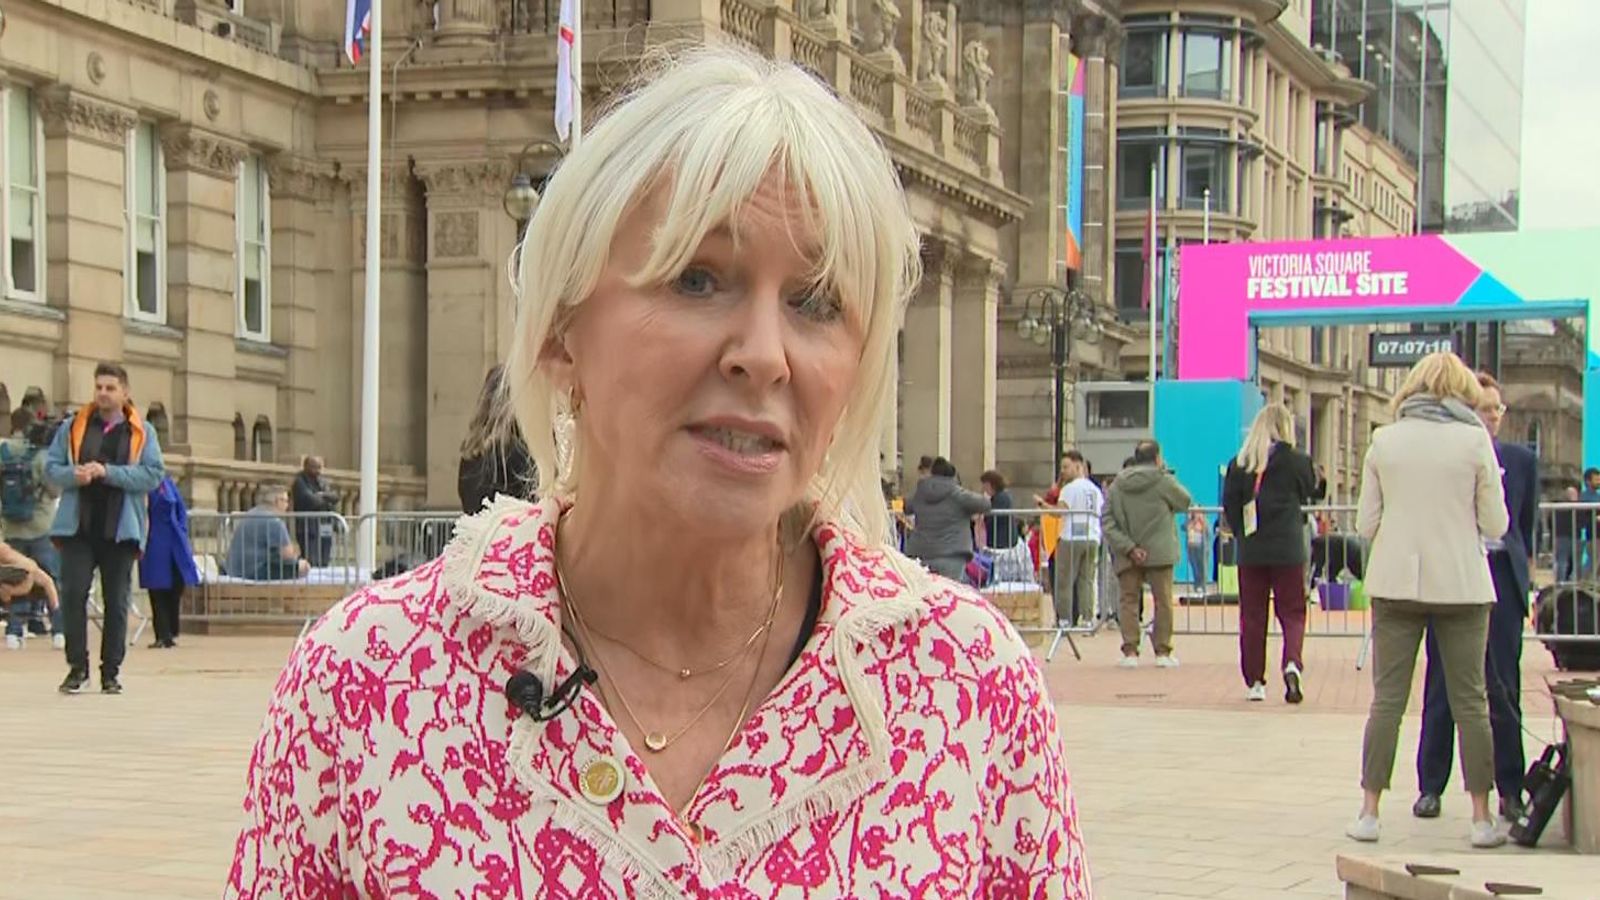 Nadine Dorries suggests Truss should call an election to obtain mandate for her policies